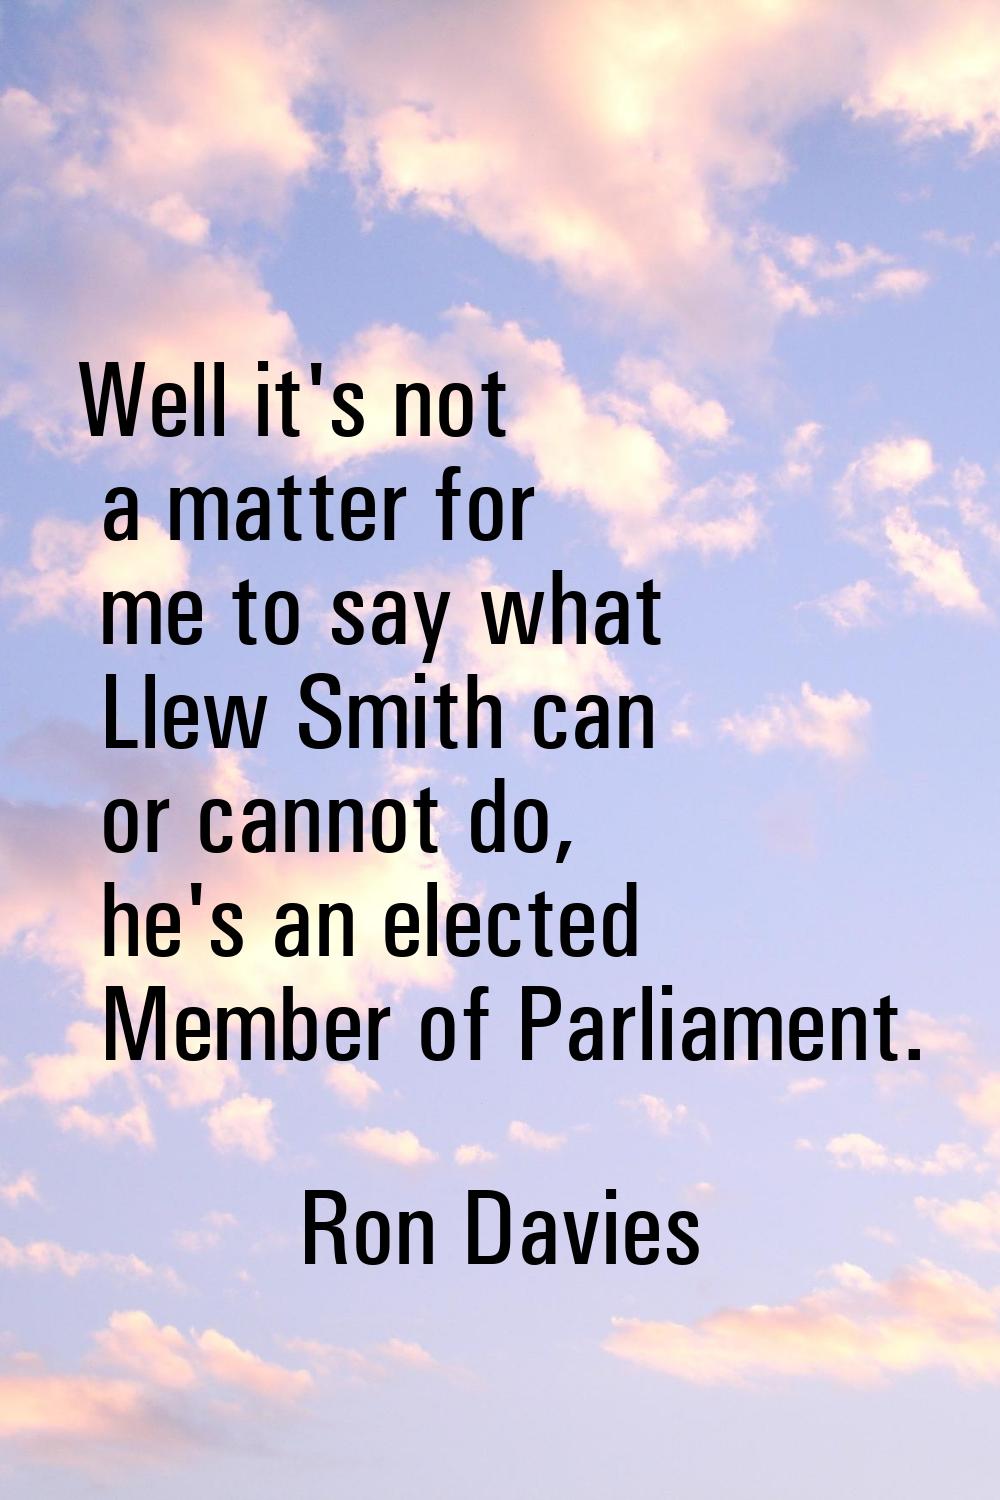 Well it's not a matter for me to say what Llew Smith can or cannot do, he's an elected Member of Pa